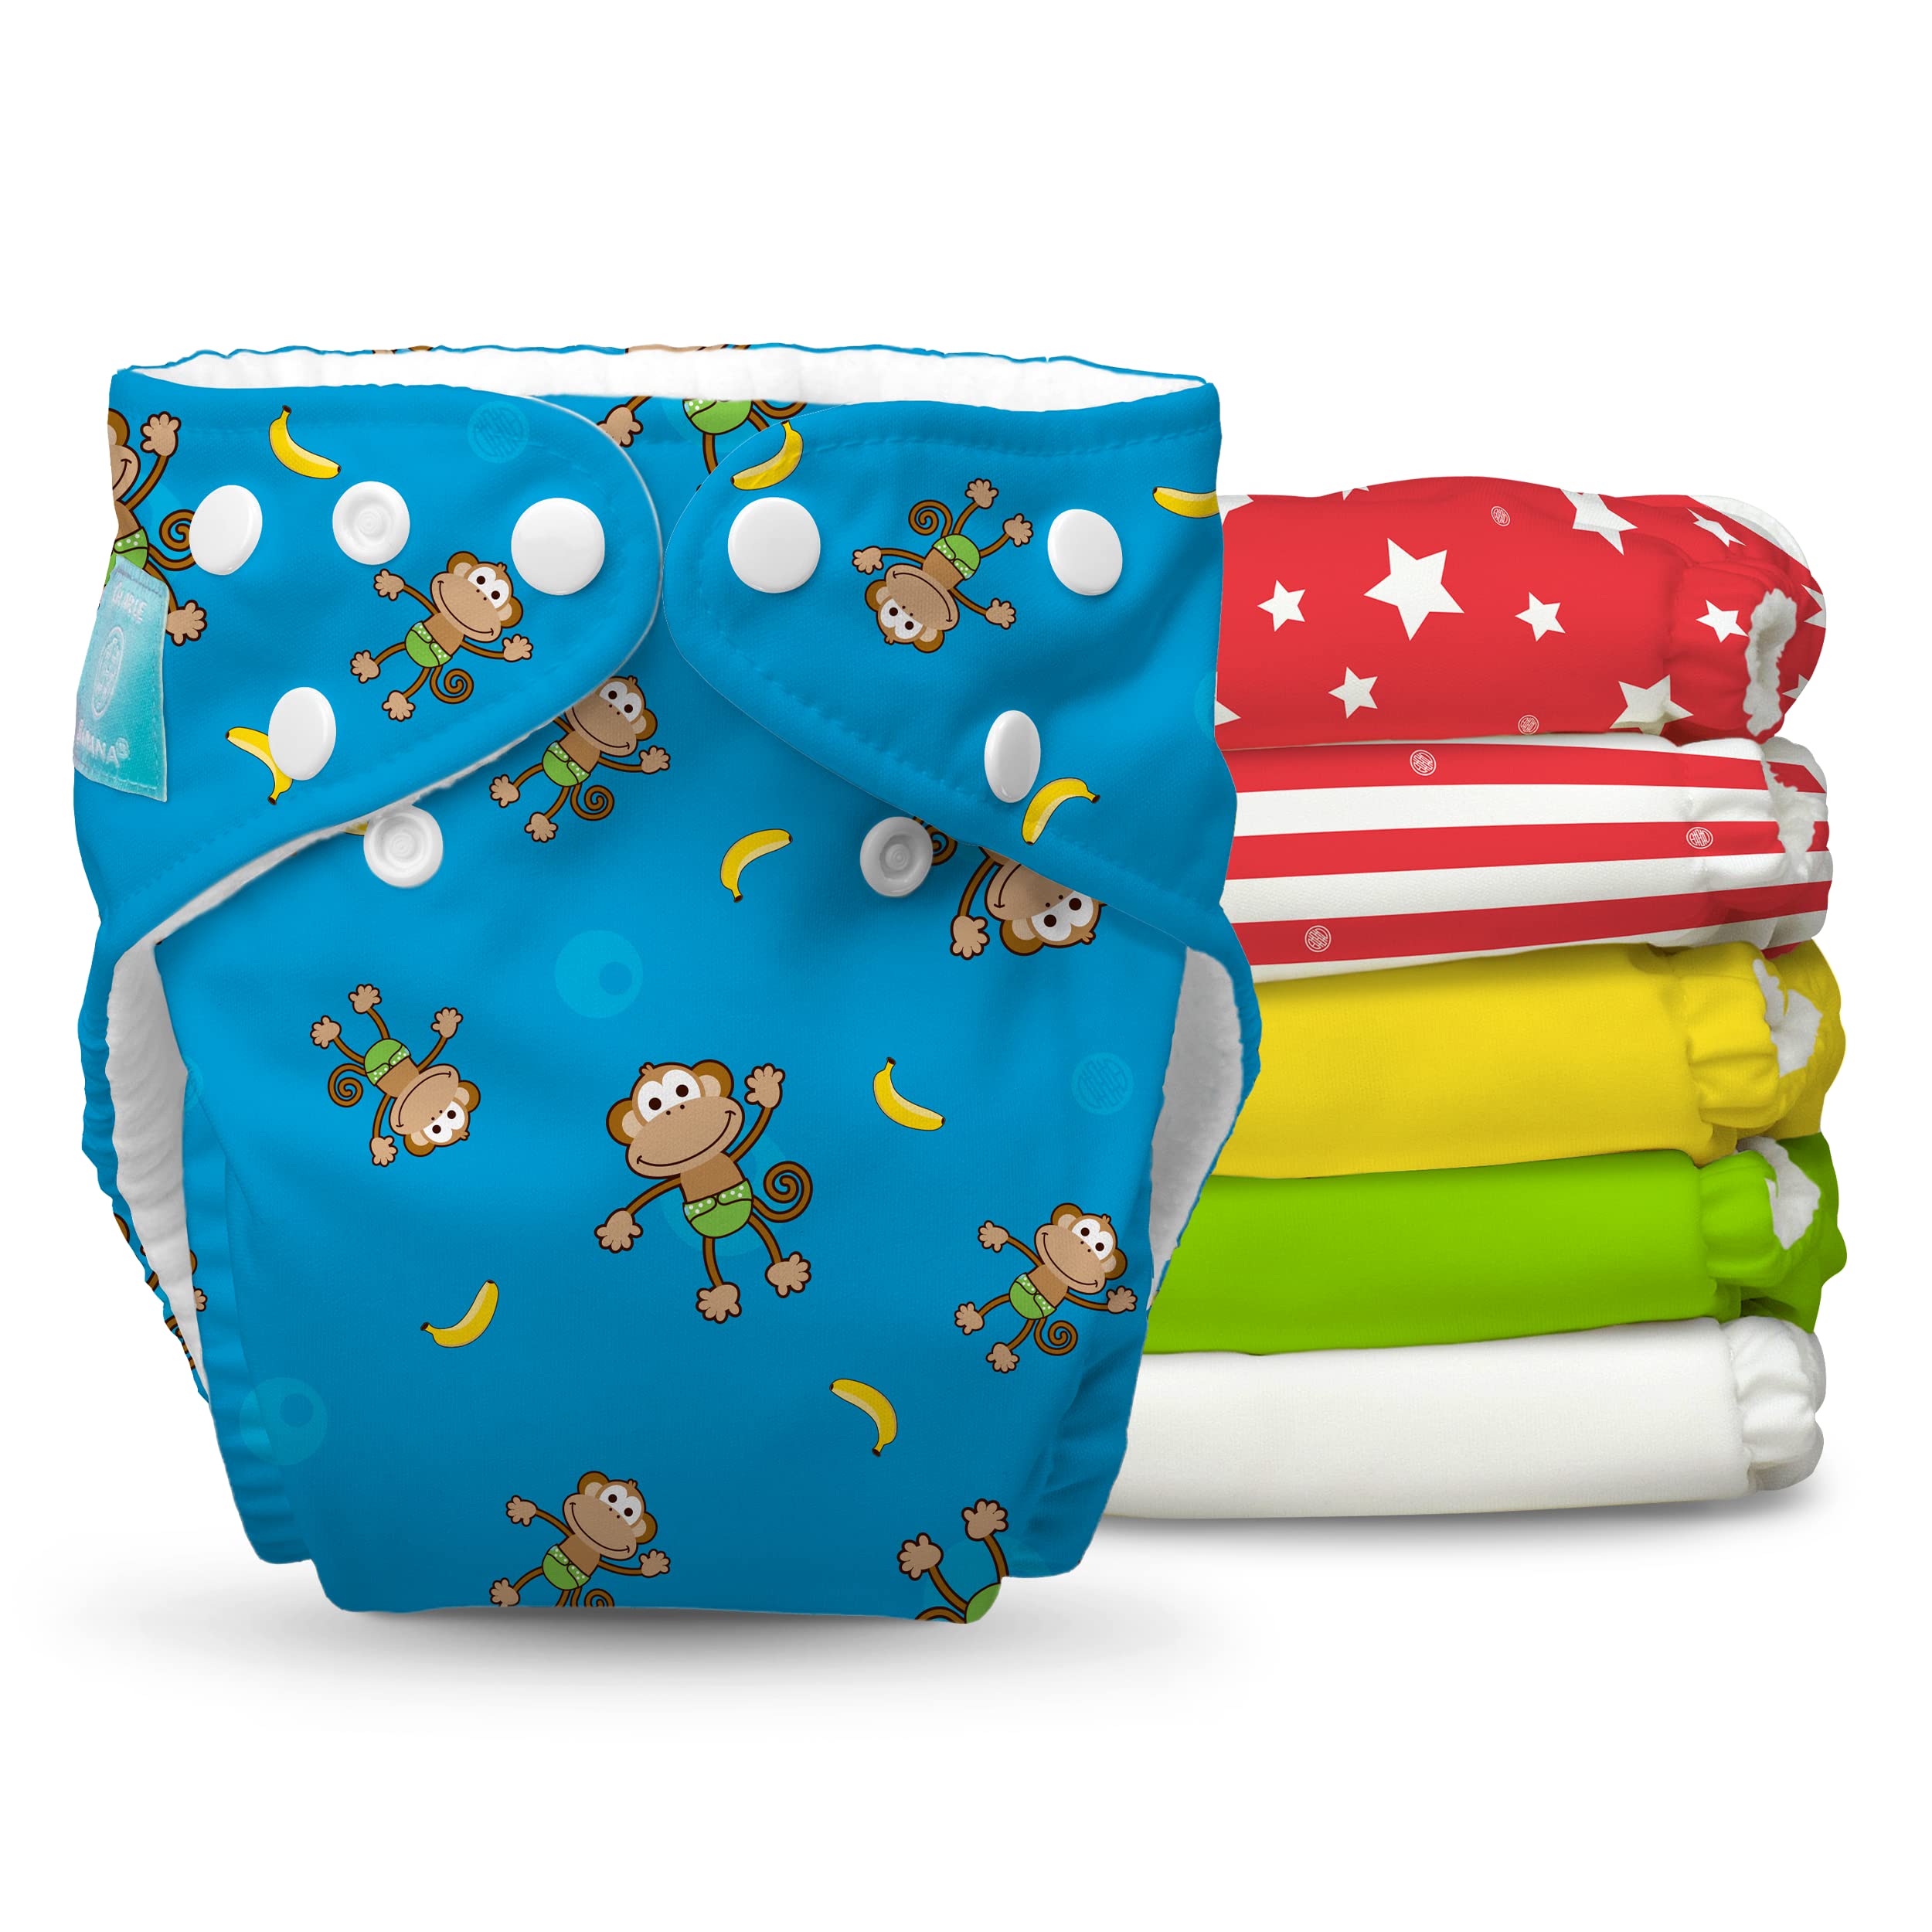 Charlie Banana Baby 2-in-1 Reusable Fleece Cloth Diapering System, Reusable and Washable, 6 Diapers and 12 Inserts, Circus, One Size